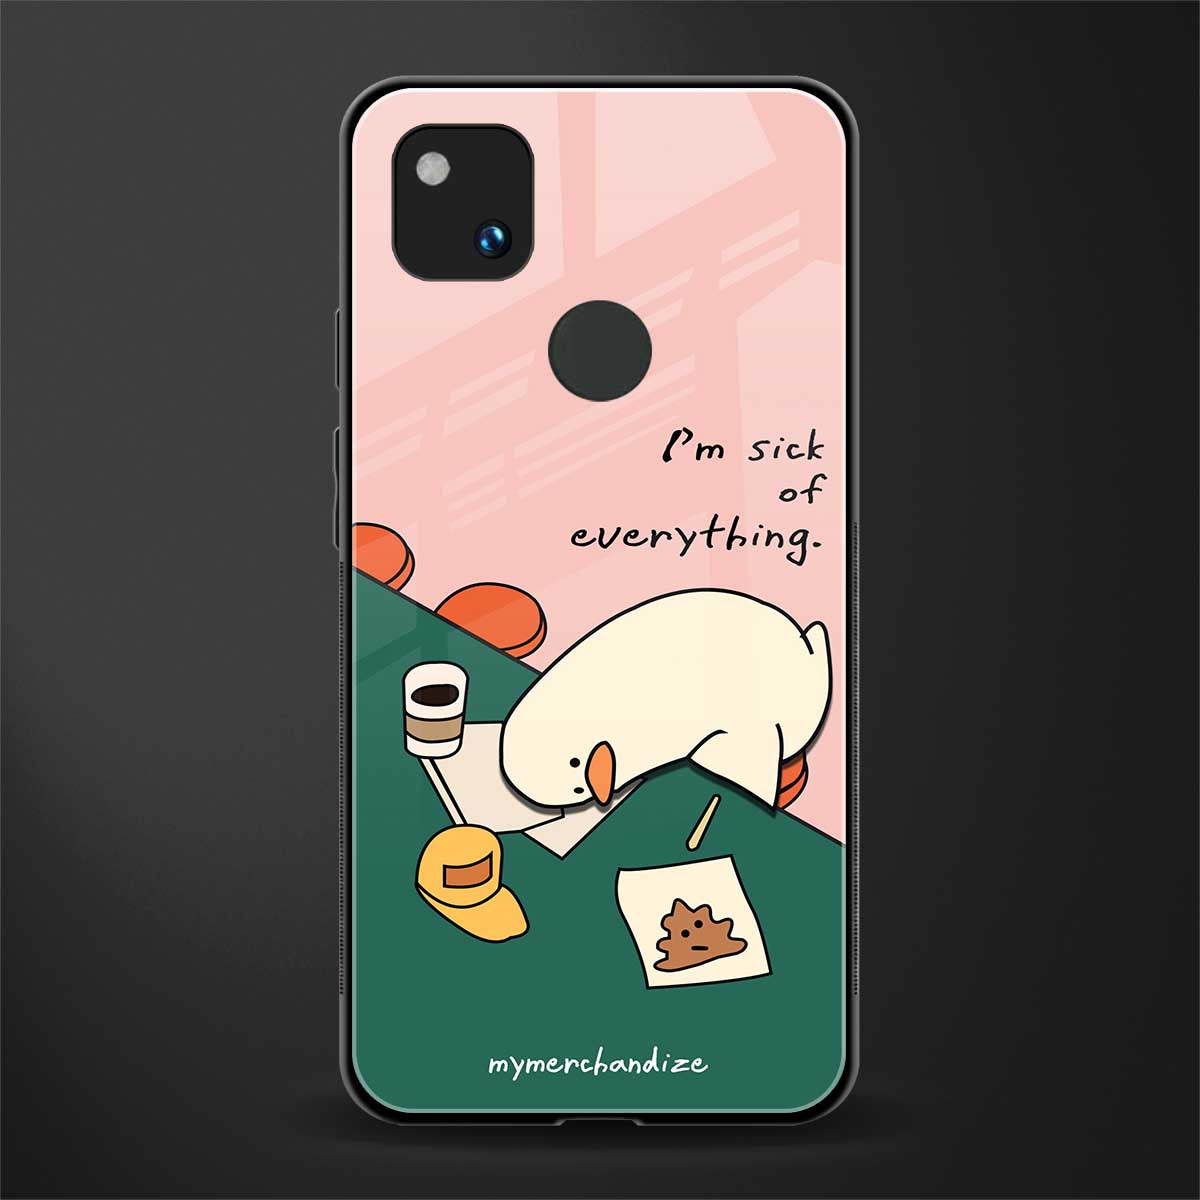 i'm sick of everything back phone cover | glass case for google pixel 4a 4g